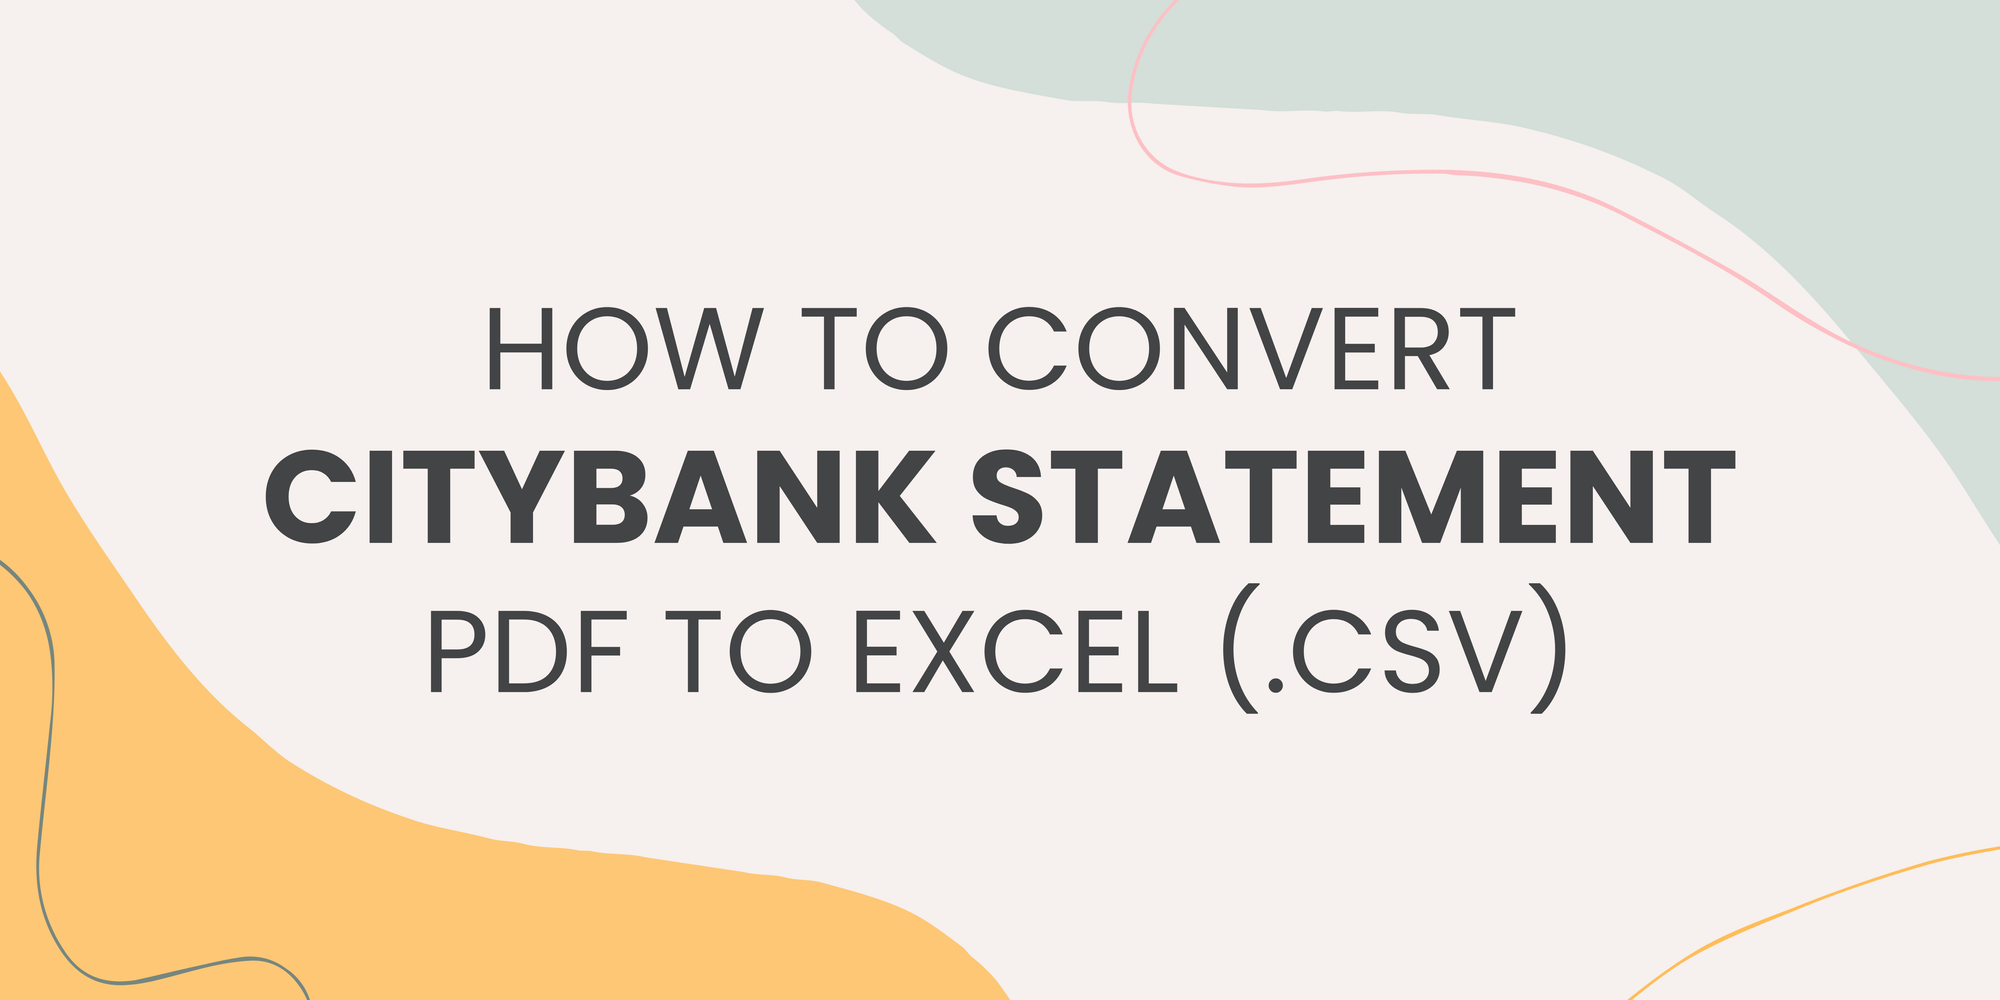 How to Convert Citibank Statement PDF to Excel (.CSV)